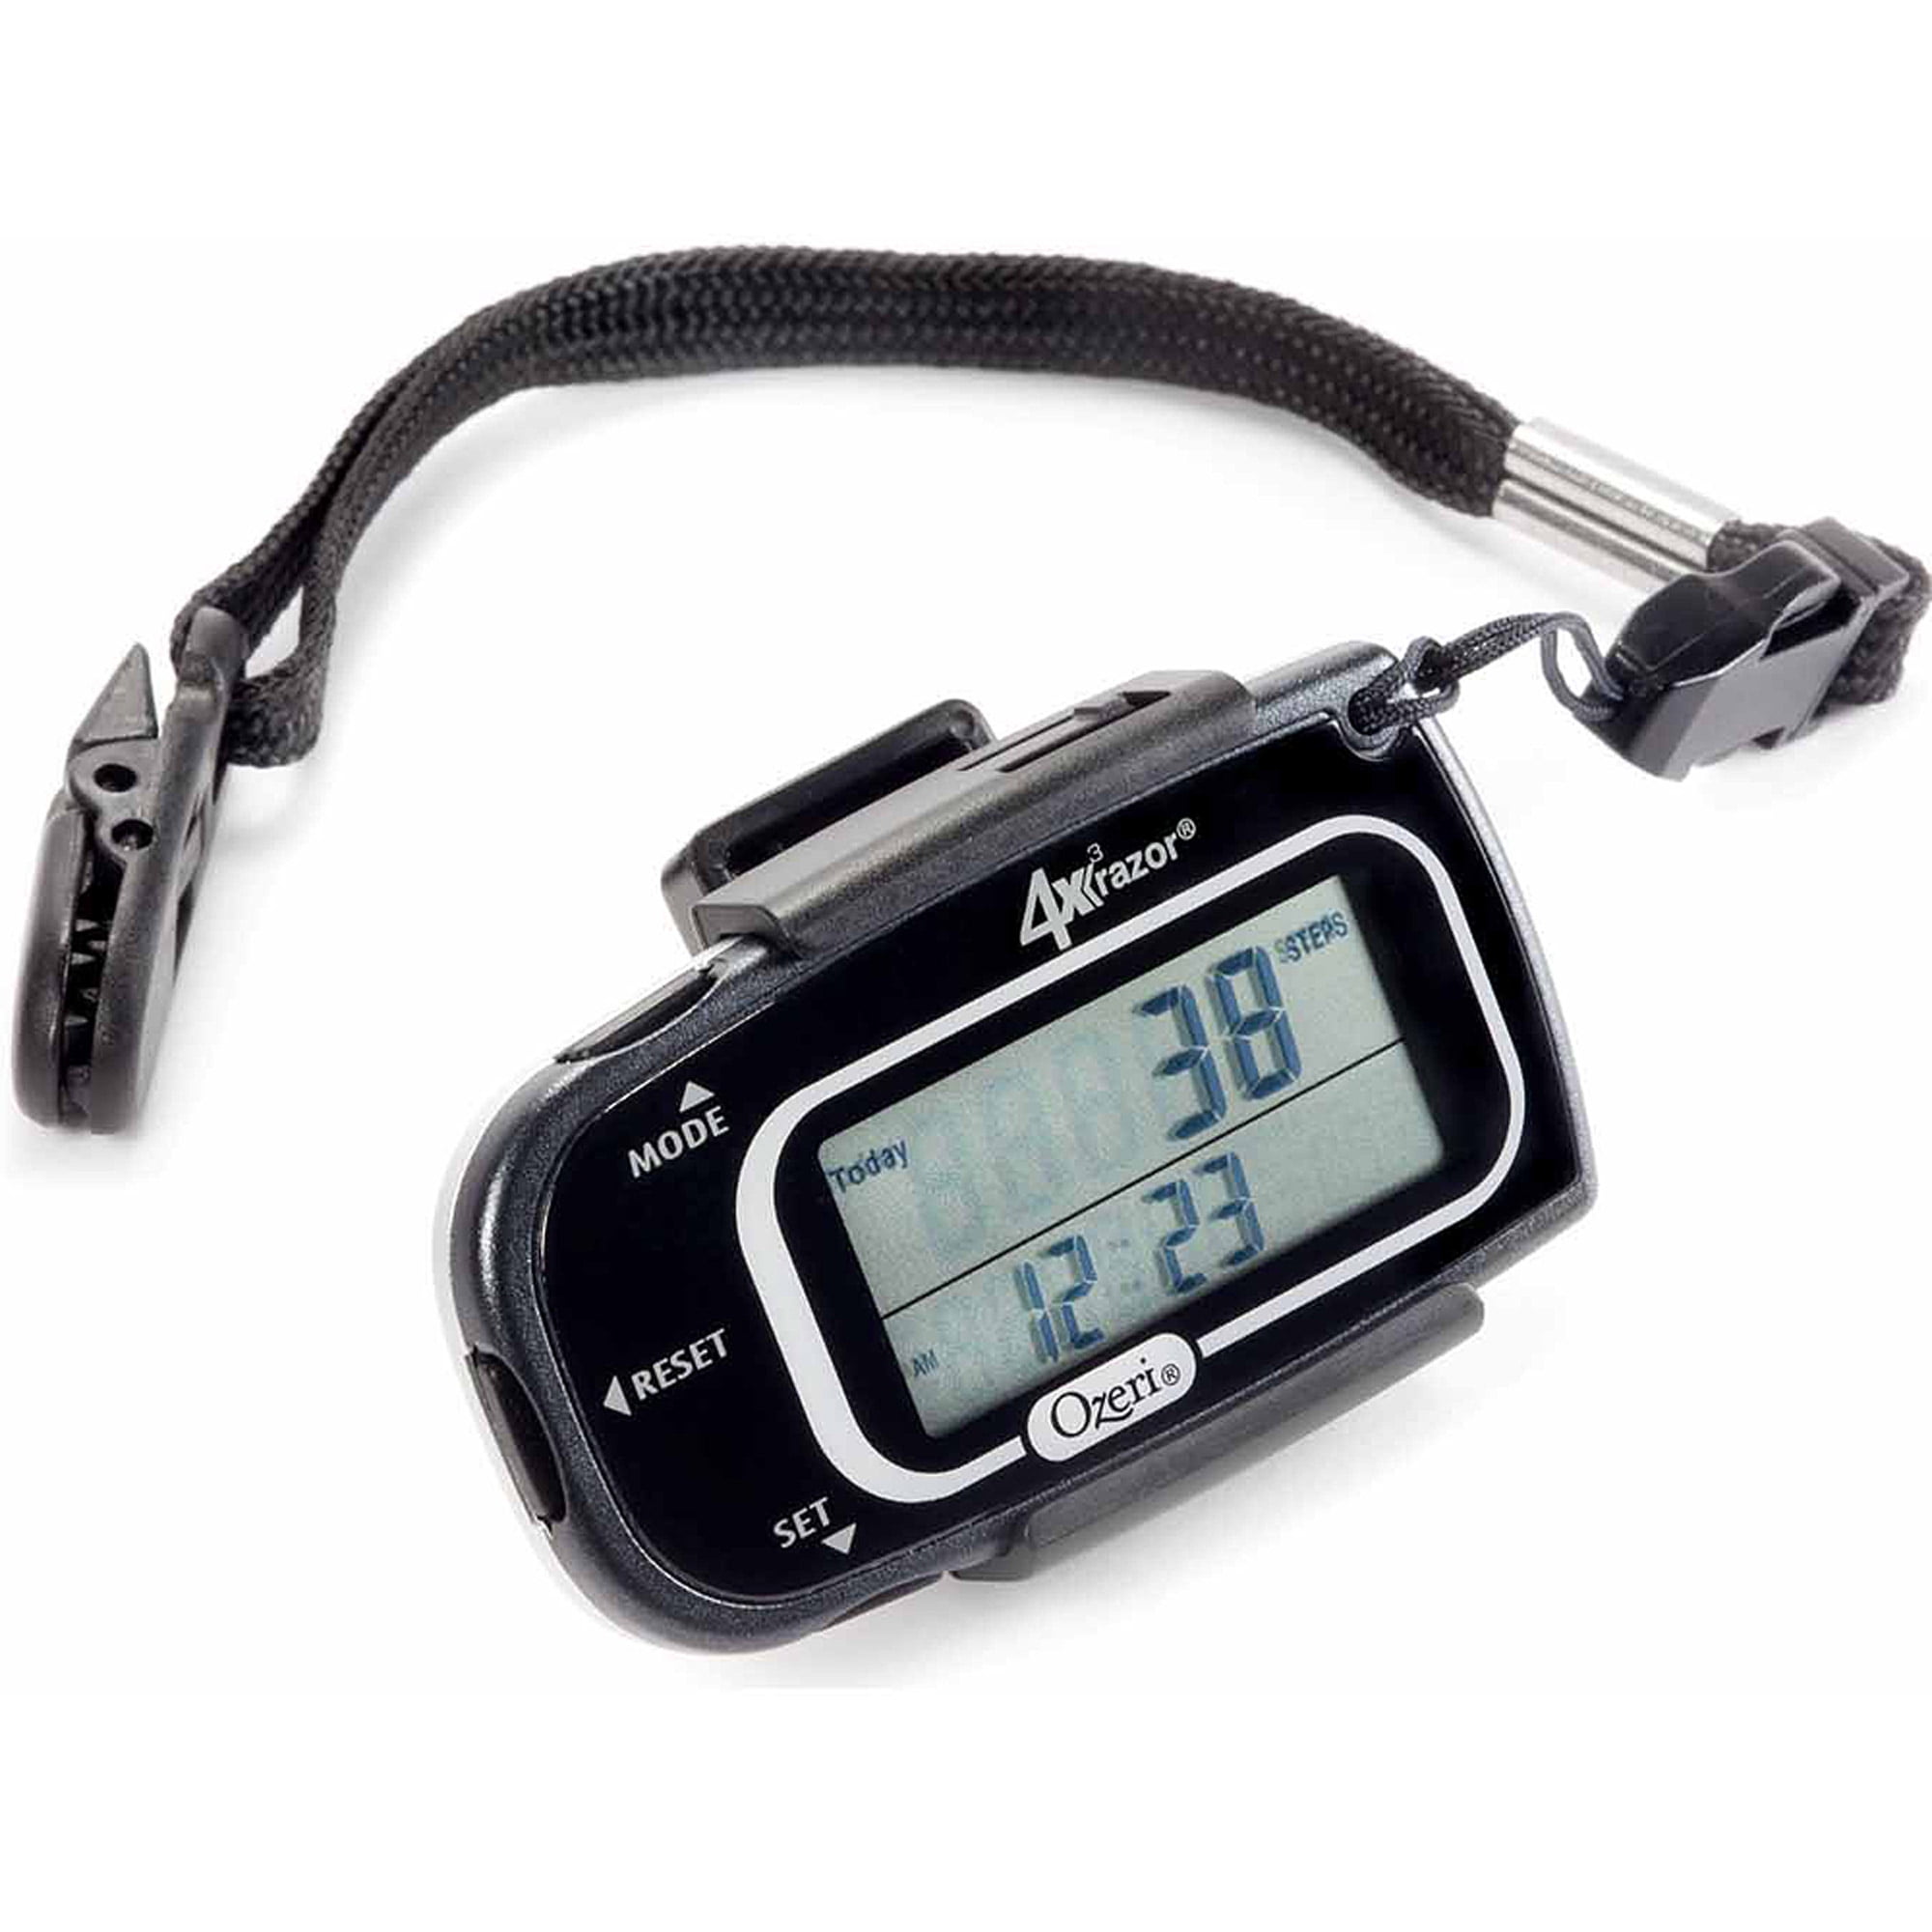 Timex T5e011 Ironman Pedometer With Calories Burned for sale online 